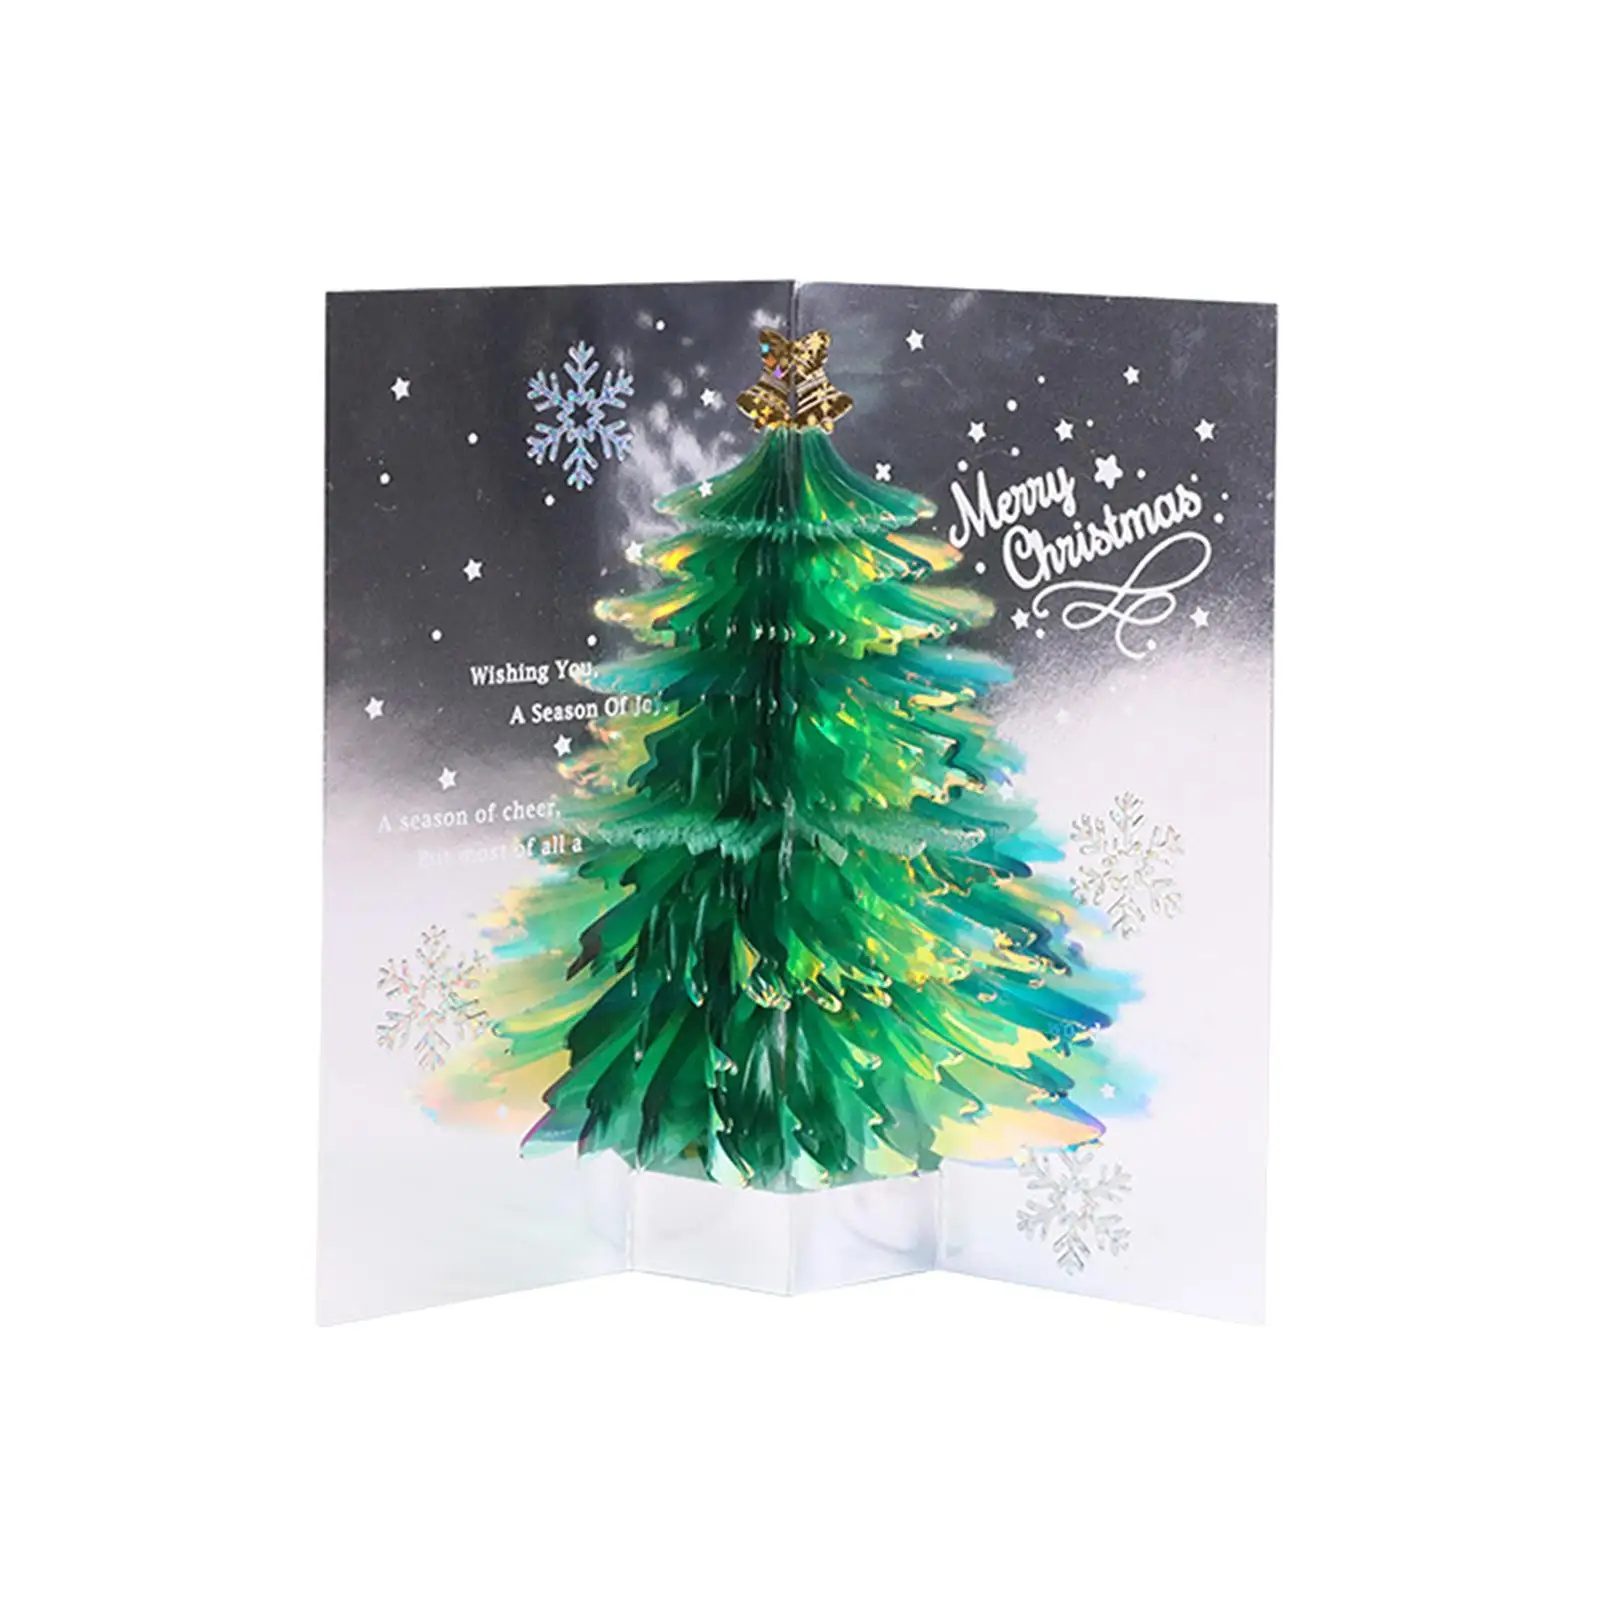 Popup Cards Christmas Greeting Cards for New Year Thanksgiving Graduation